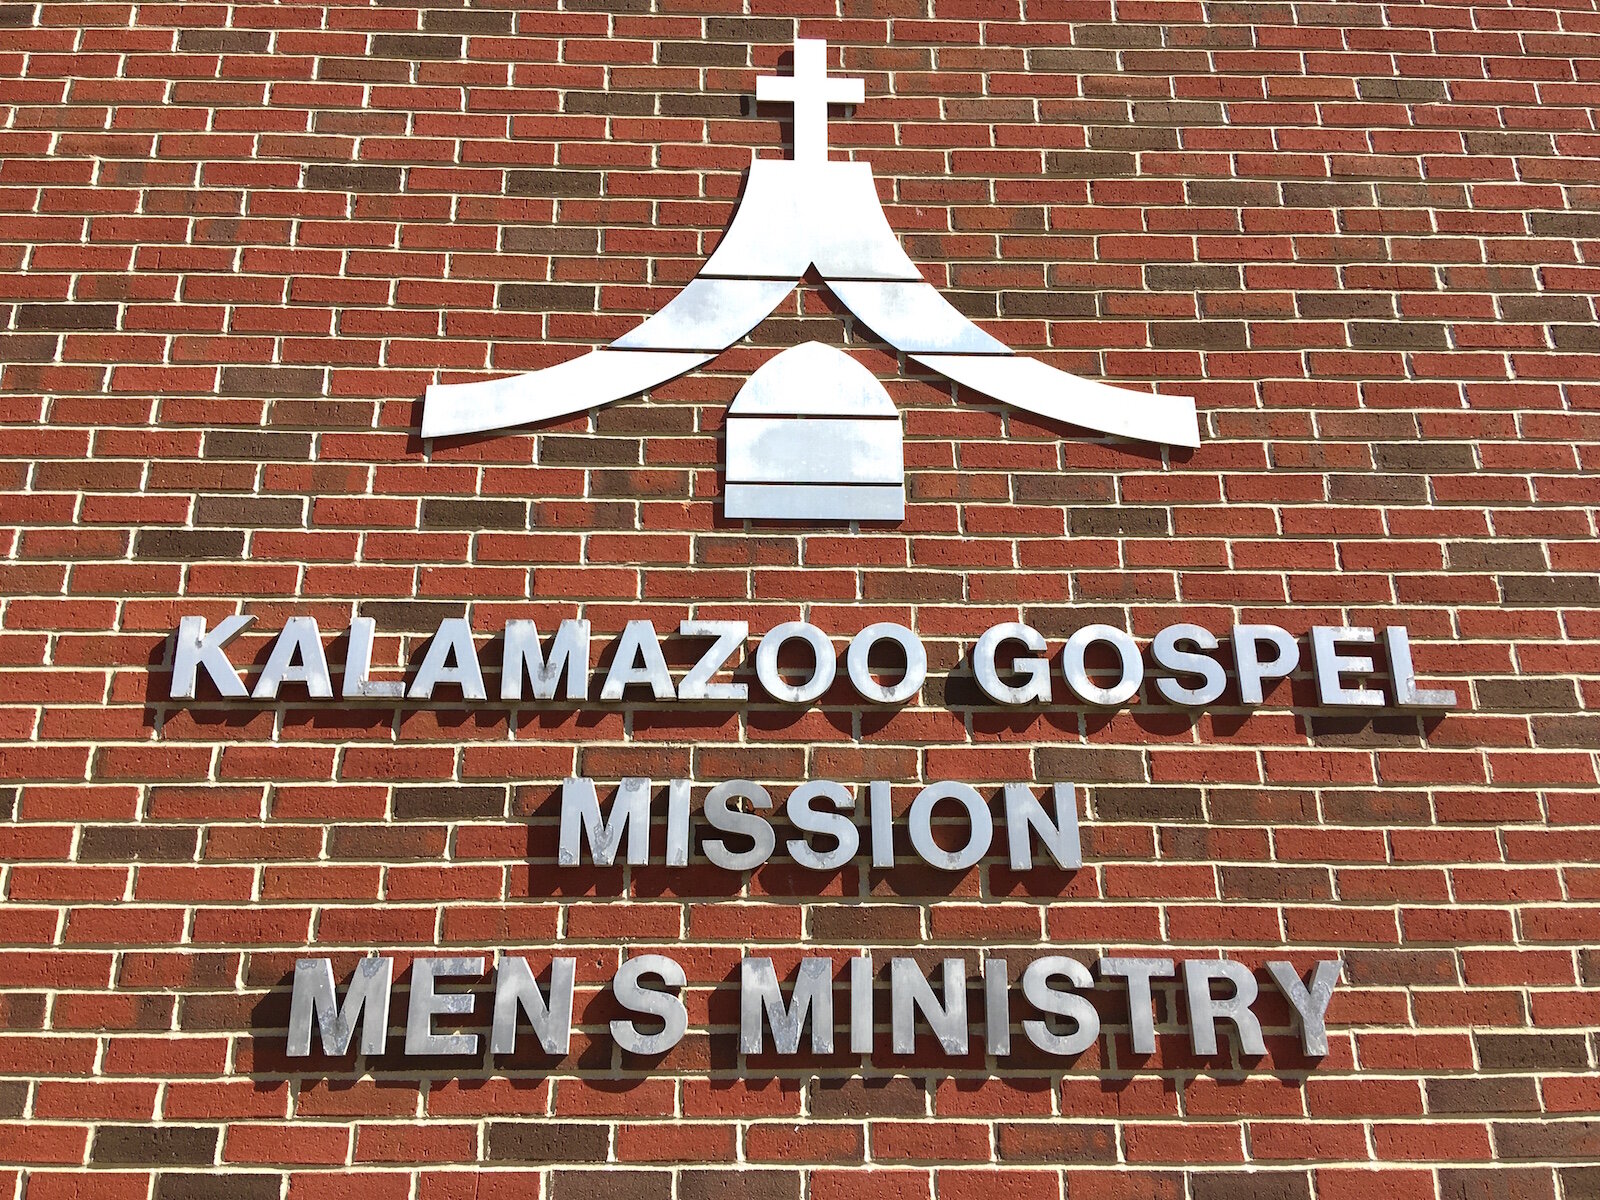 The Kalamazoo Gospel Mission is preparing more boxed lunches in hopes of having fewer patrons congregate for lunch in its cafeteria. By order of Michigan Gov, Gretchen Whitmer, it is trying to keep the number of people using the cafeteria below 50.